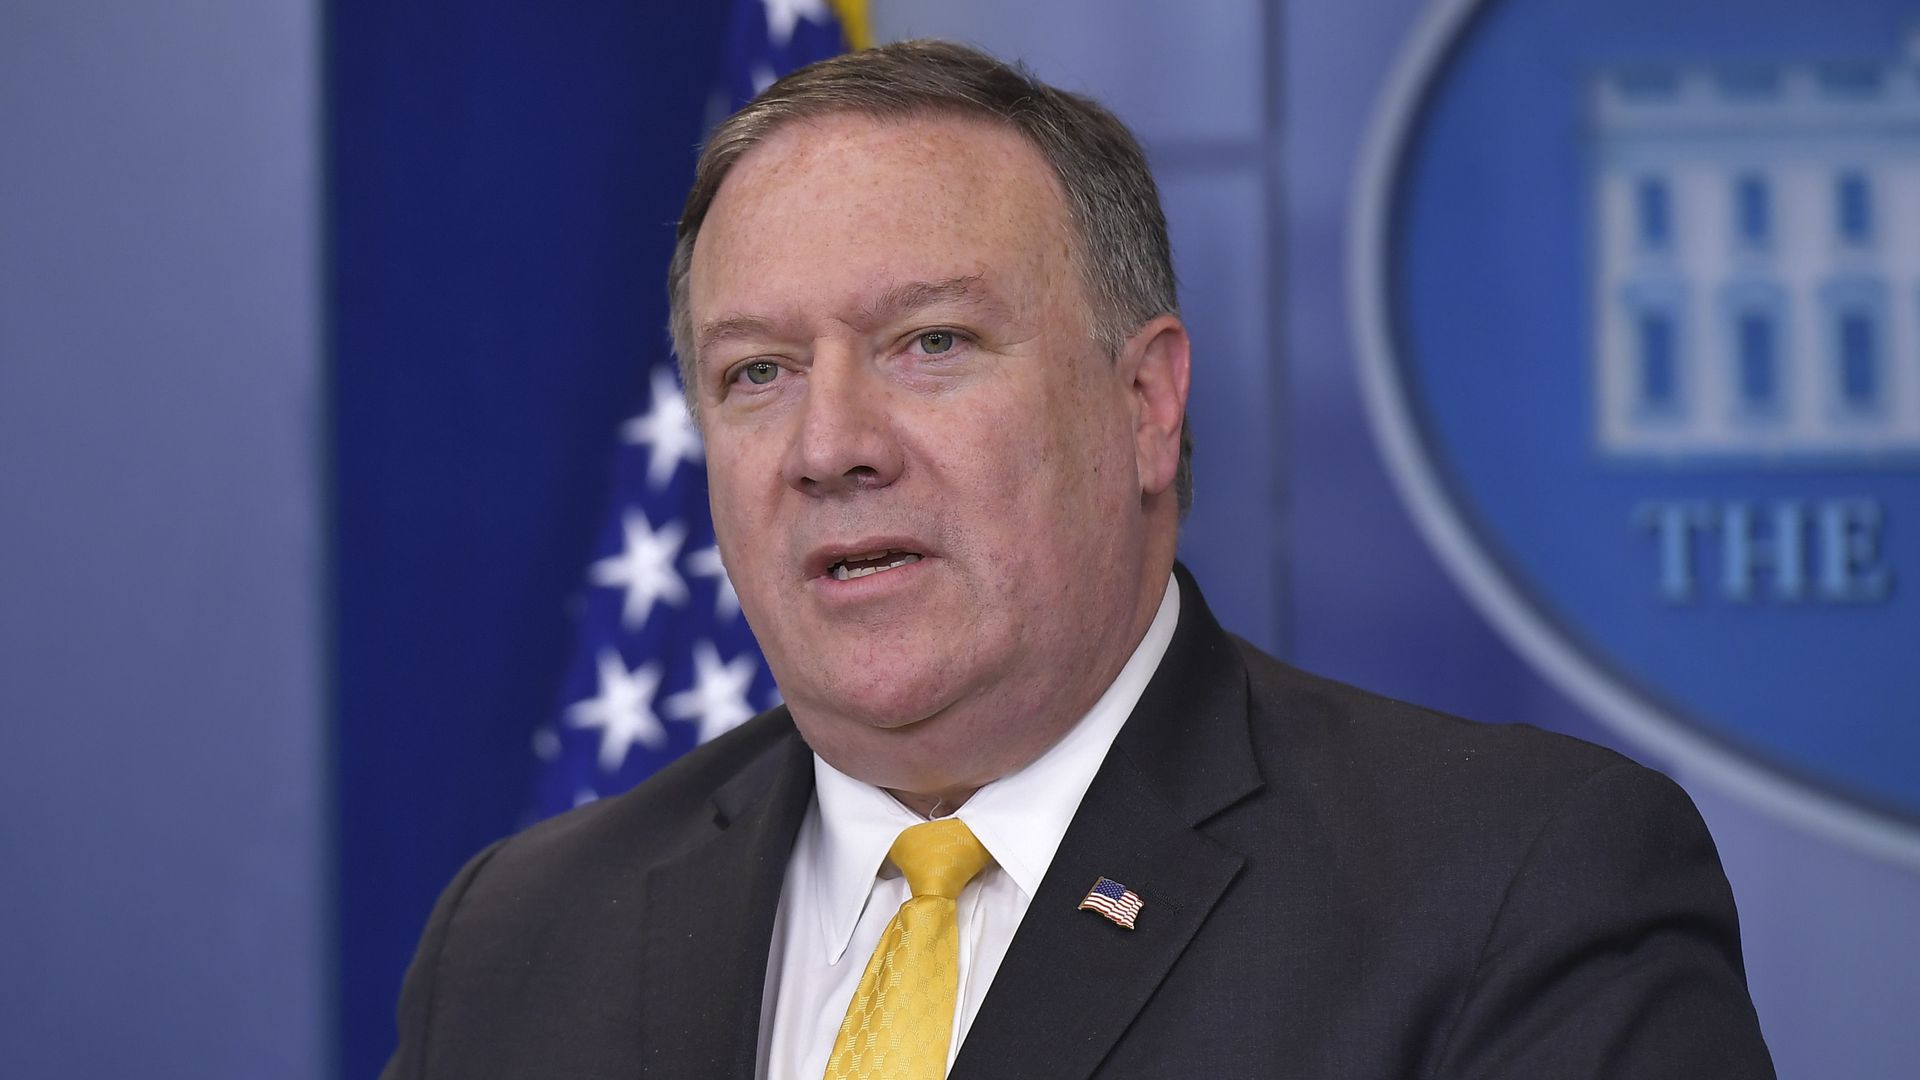 Pompeo speaks in the White House briefing room